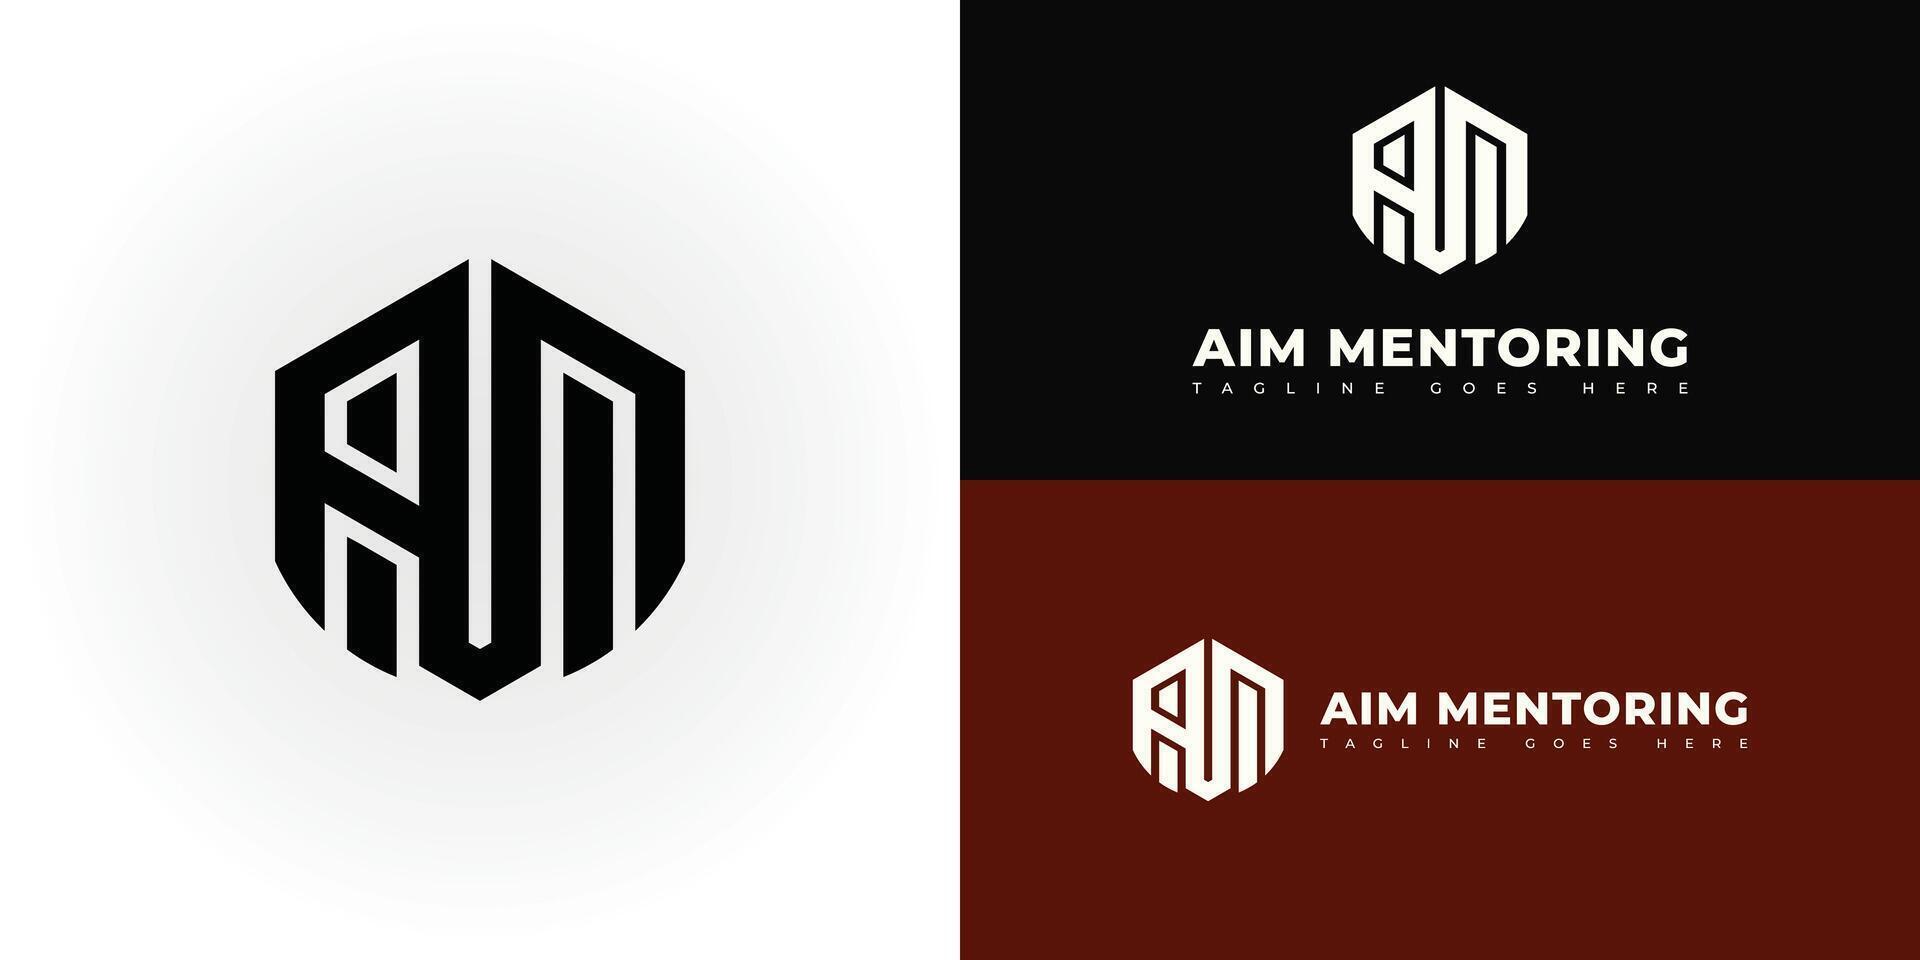 Abstract initial letter AM or MA logo in black color isolated on multiple background colors. The logo is suitable for marketing coaching business company logo icons to design inspiration templates. vector